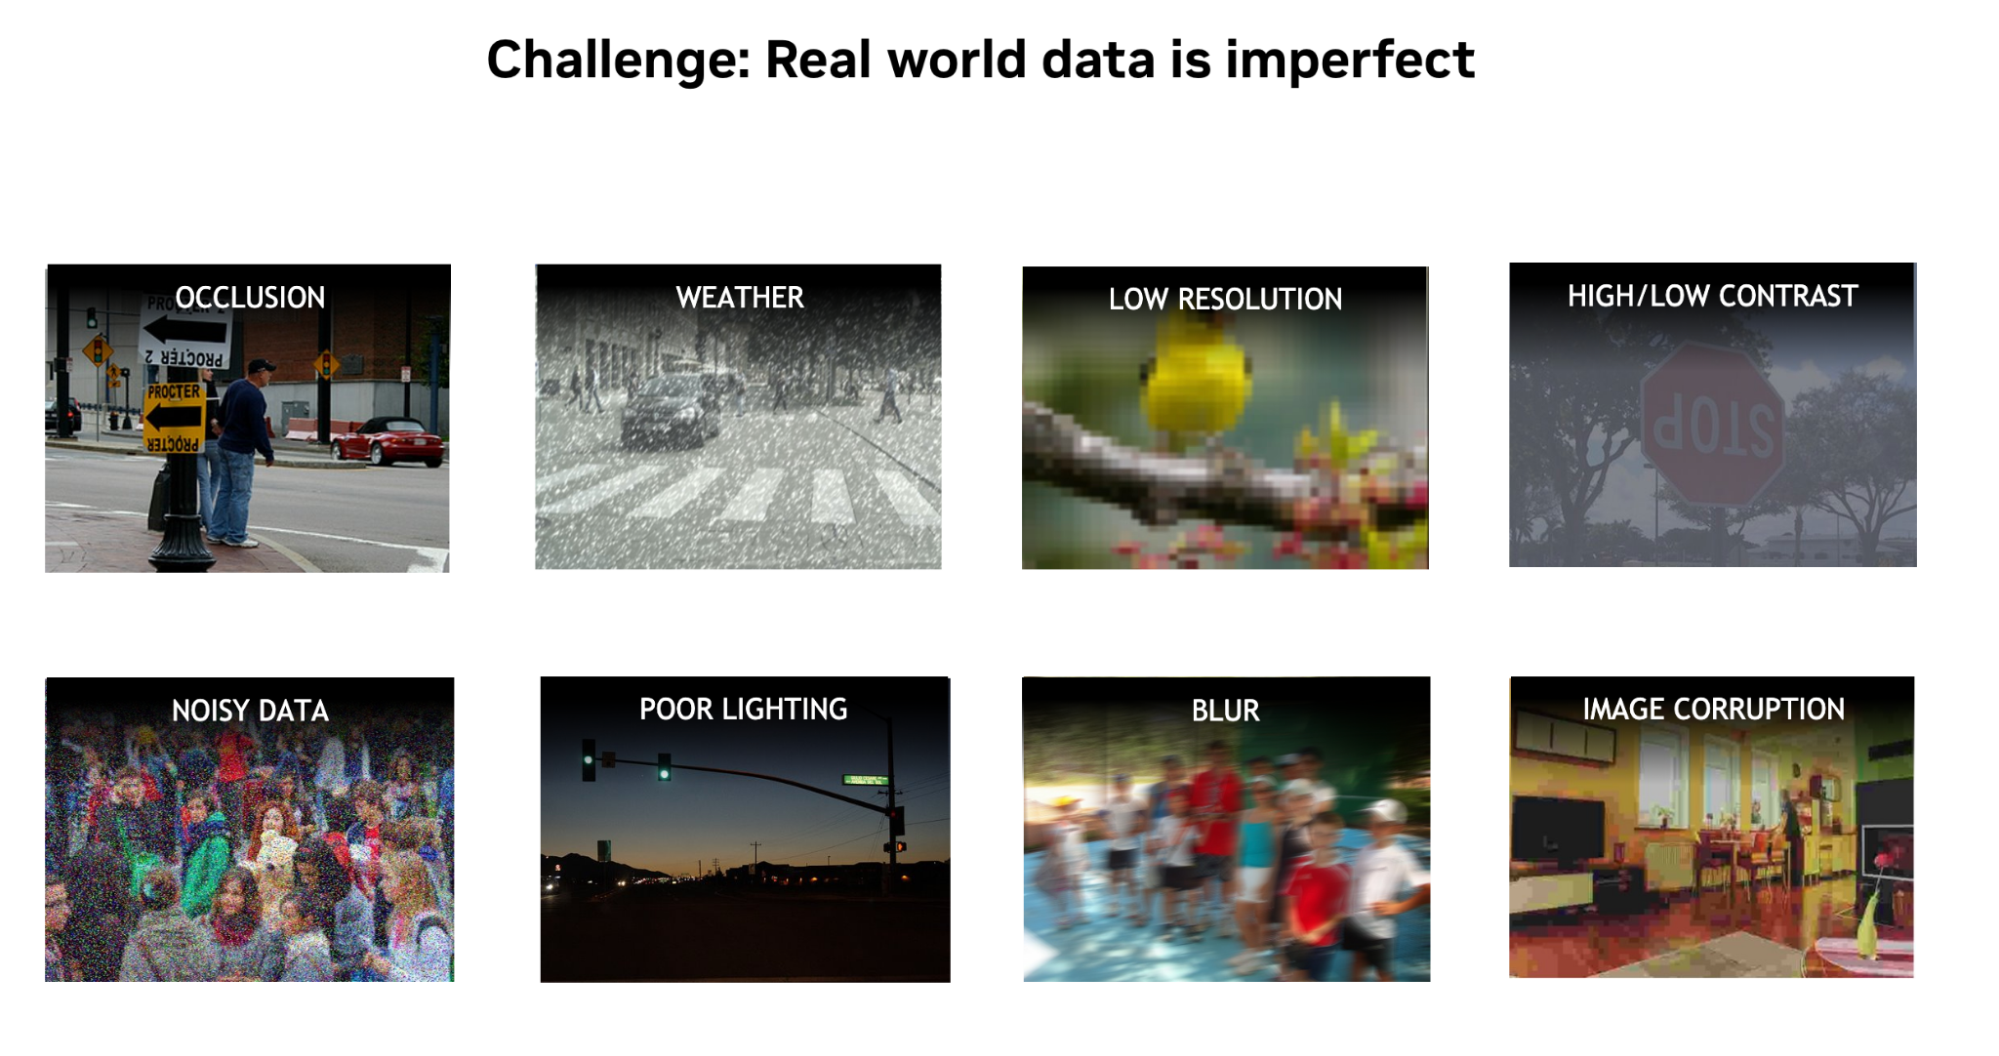 Various examples of noise and imperfections in real-world data such as occlusion, poor lighting, weather conditions (rain, fog), image corruption, etc.